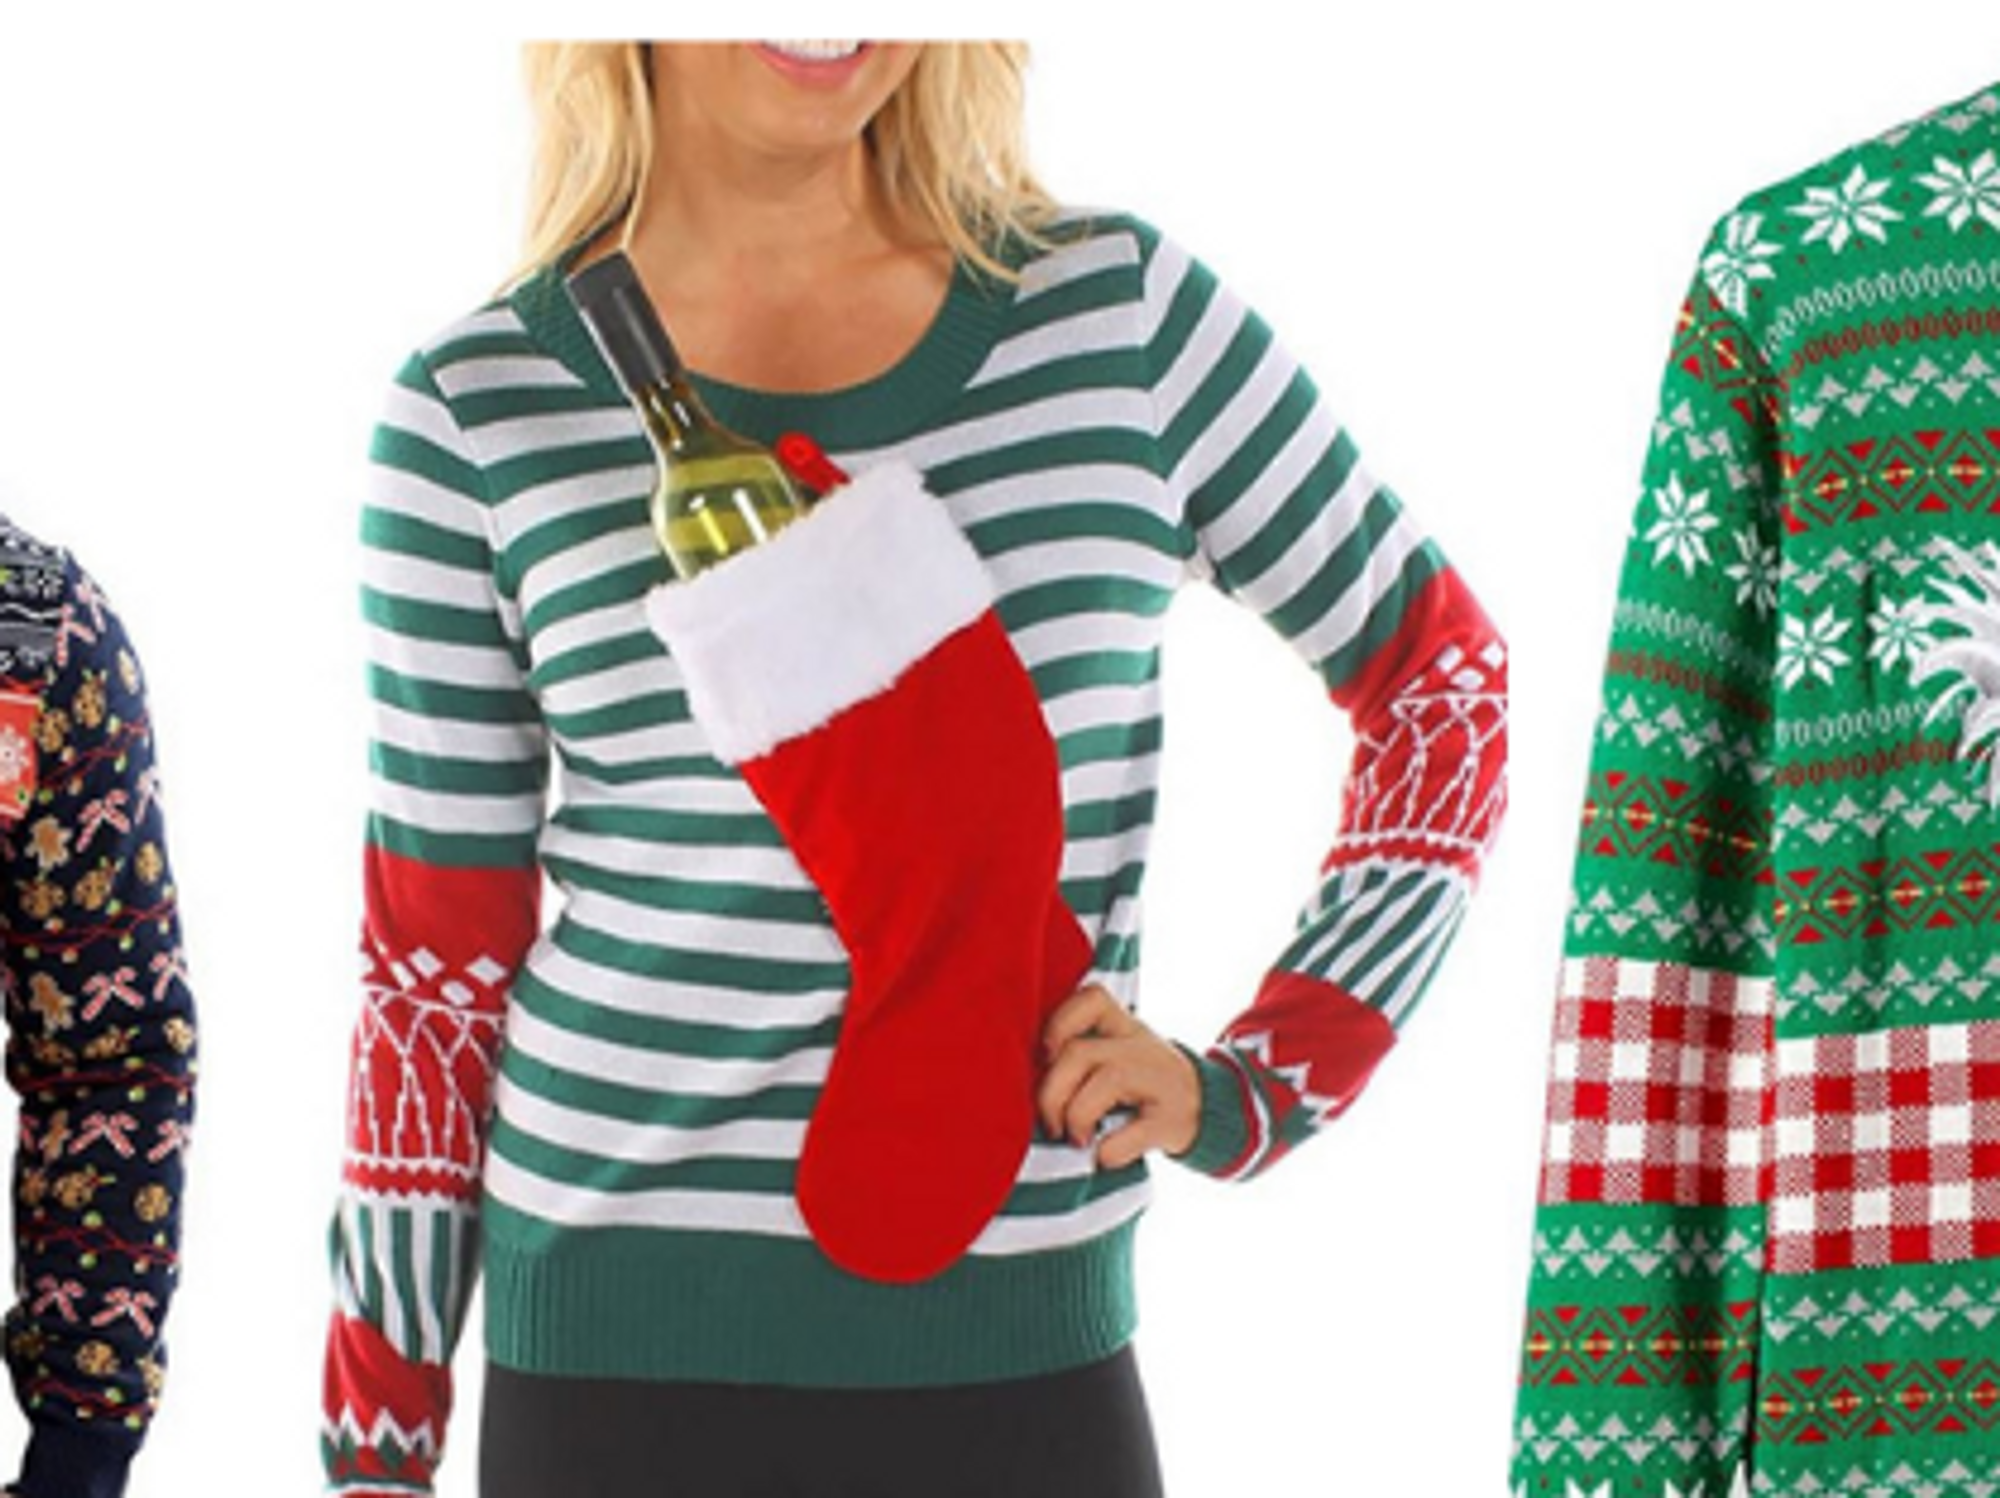 12 Places To Buy An Ugly Christmas Sweater That's So Bad It's Perfect